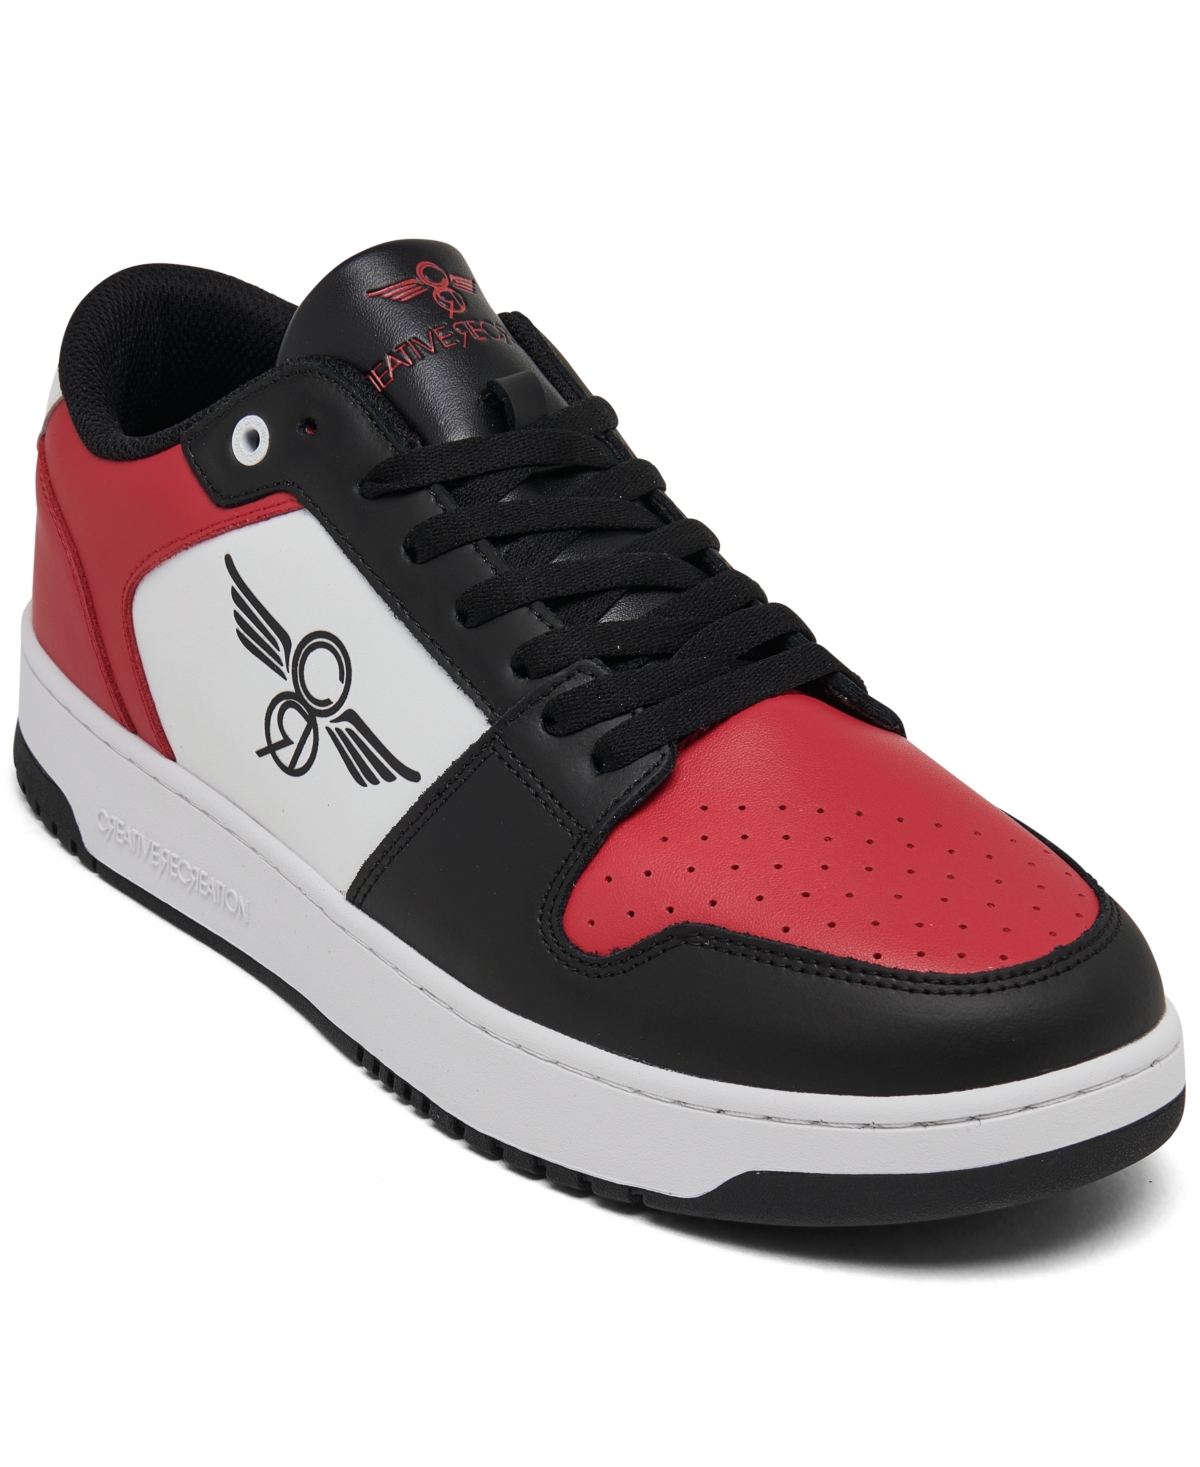 Men's Dion Low Casual Sneakers from Finish Line - Black, Red, White